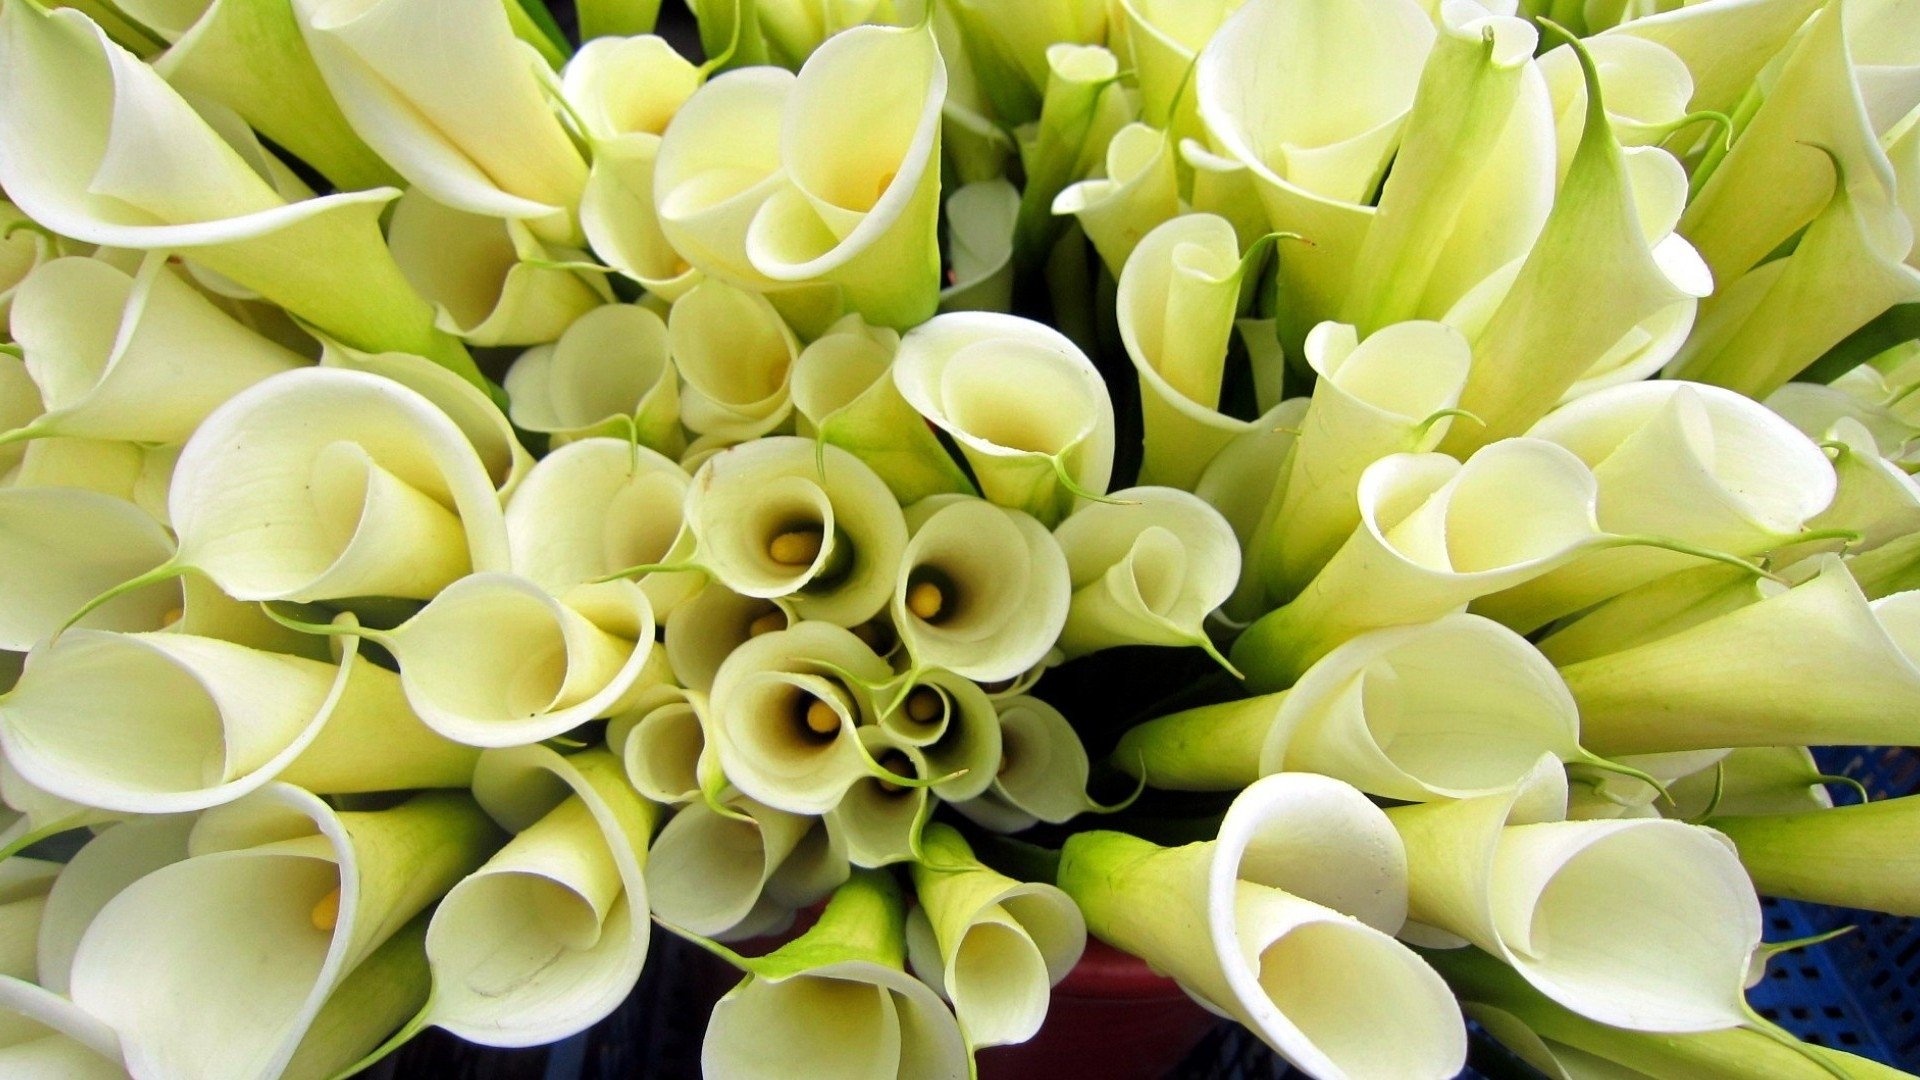 Calla Lily: The plant produce large, showy flowers spathes, Botany. 1920x1080 Full HD Wallpaper.